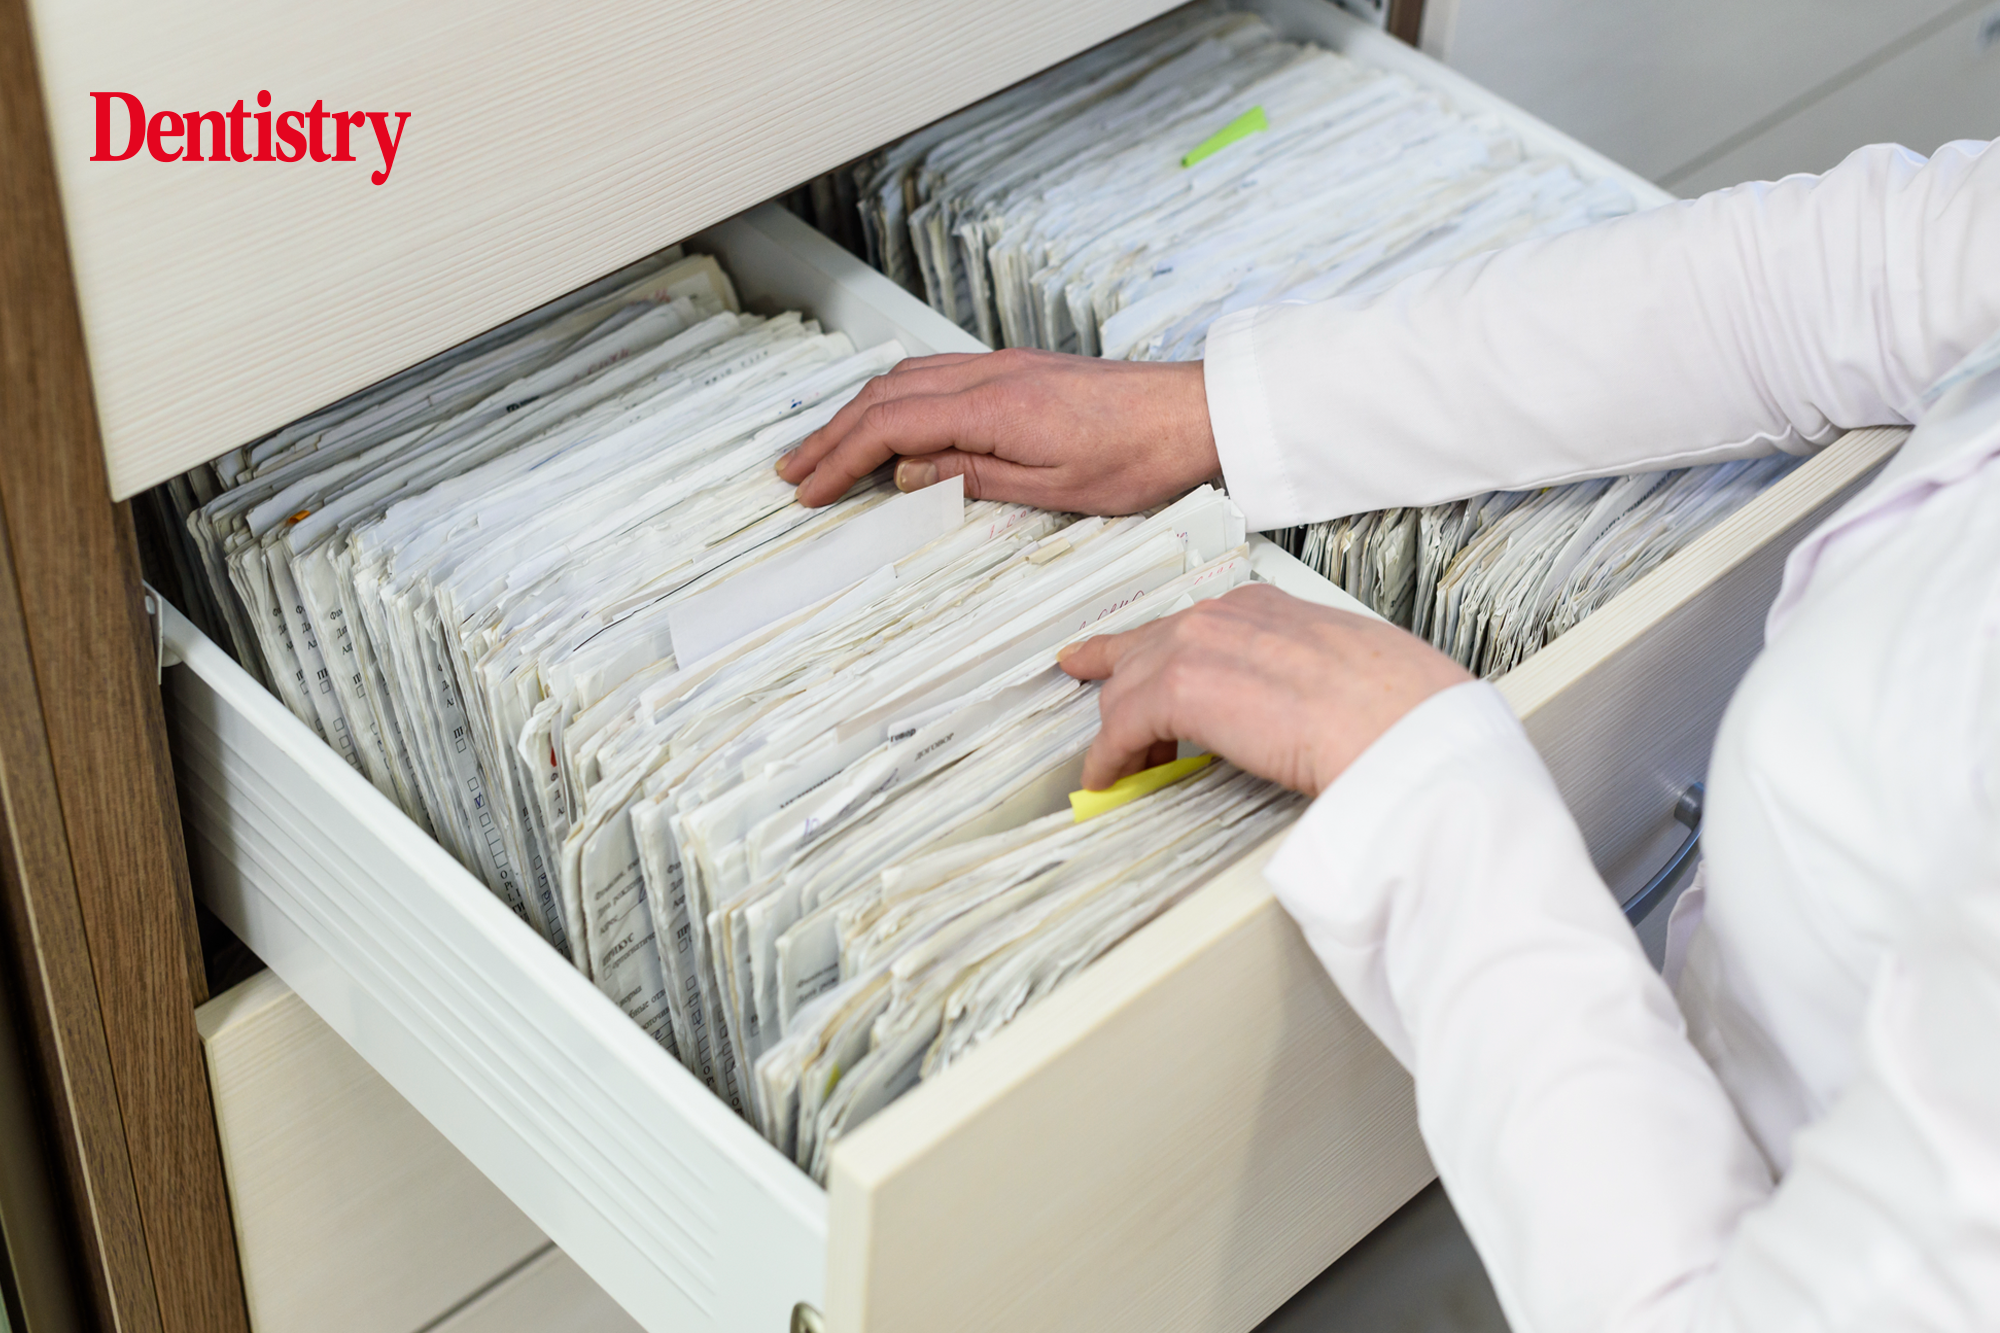 Patient records: legal issues to avoid